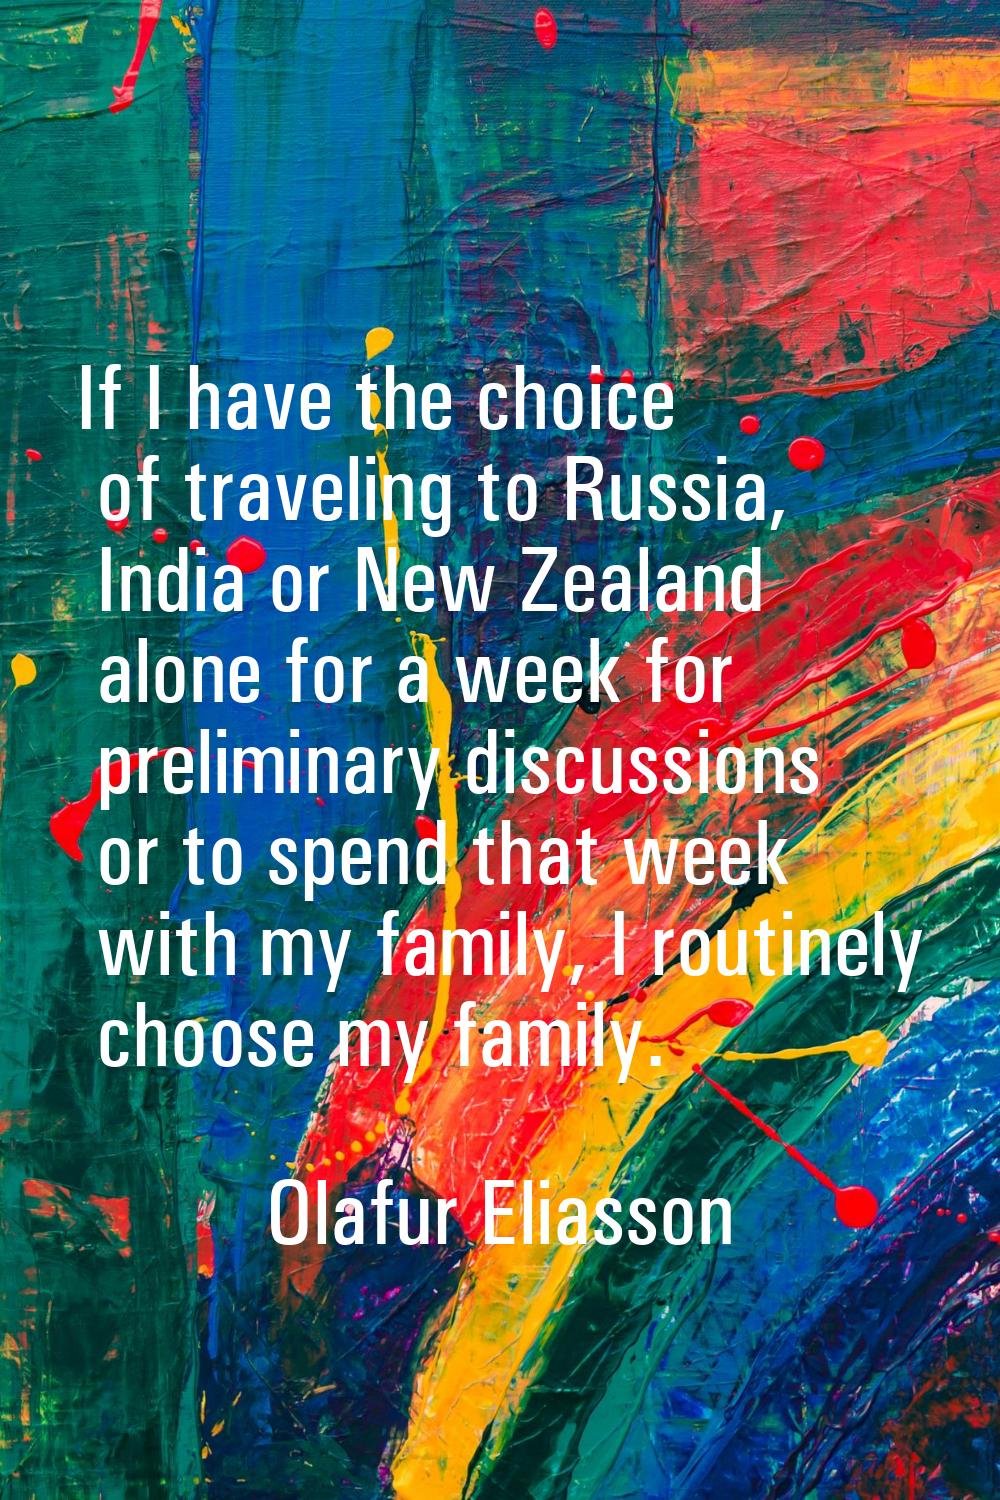 If I have the choice of traveling to Russia, India or New Zealand alone for a week for preliminary 